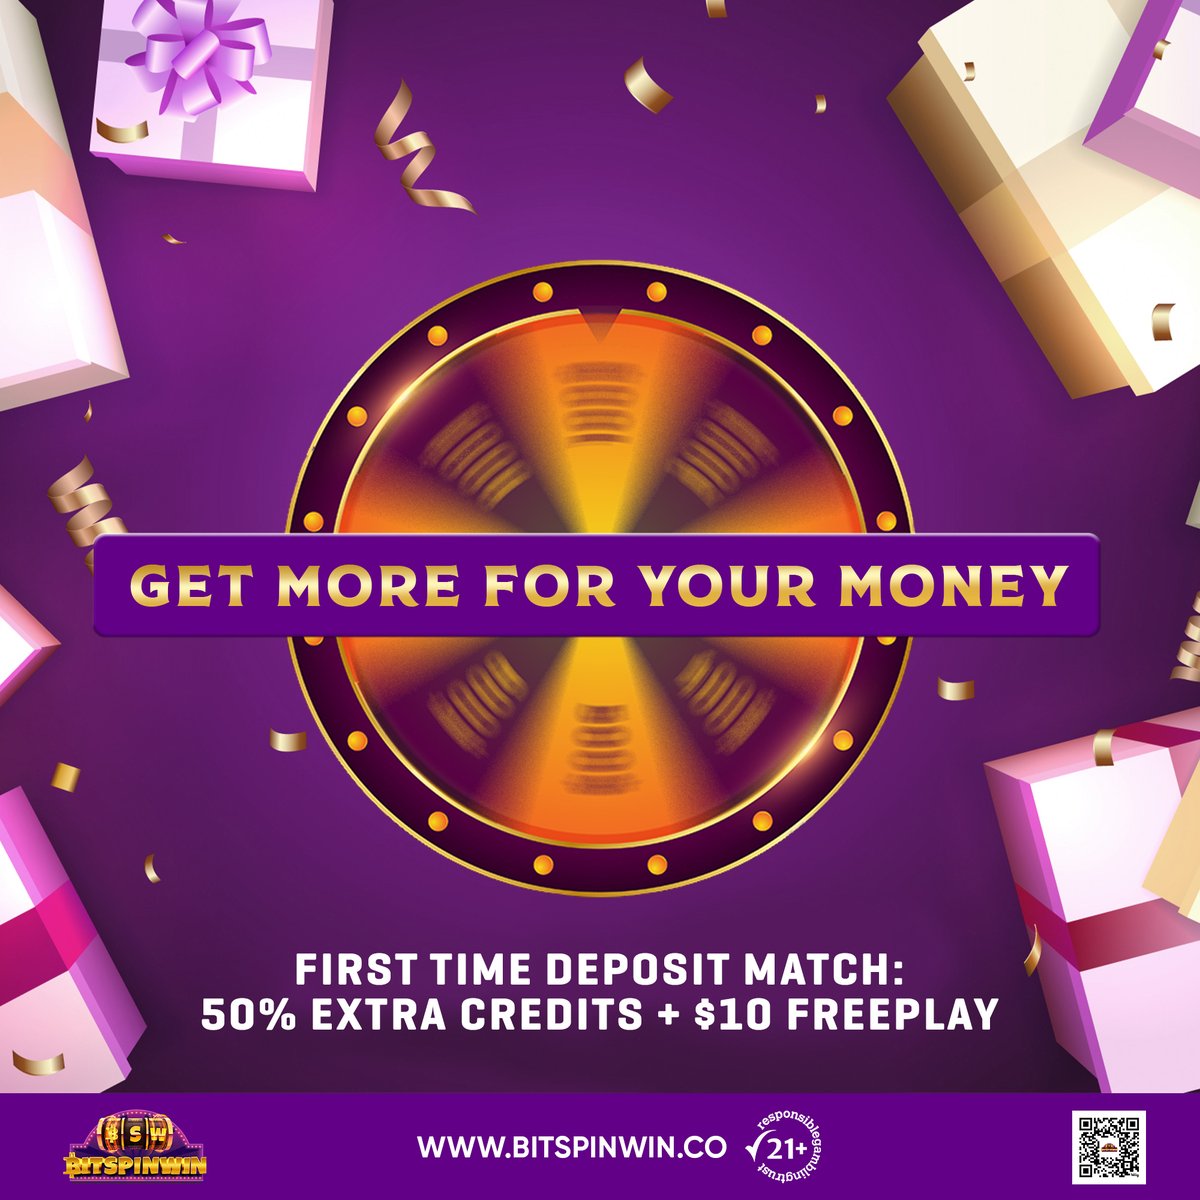 @bitspinwin 𝐨𝐟𝐟𝐞𝐫𝐬 𝐚𝐧 𝐮𝐥𝐭𝐢𝐦𝐚𝐭𝐞 𝐰𝐞𝐥𝐜𝐨𝐦𝐞 𝐩𝐚𝐜𝐤𝐚𝐠𝐞!🎁 Here's what you get on your FIRST DEPOSIT: A WHOPPING 𝟓𝟎% 𝐁𝐨𝐧𝐮𝐬💸 AN EXTRA $𝟏𝟎 𝐢𝐧 𝐅𝐫𝐞𝐞𝐩𝐥𝐚𝐲🎰 Use 𝐋𝐢𝐠𝐡𝐭𝐧𝐢𝐧𝐠 𝐃𝐞𝐩𝐨𝐬𝐢𝐭: bit.ly/bswdepositfb #Knicks #subway #McCarthy